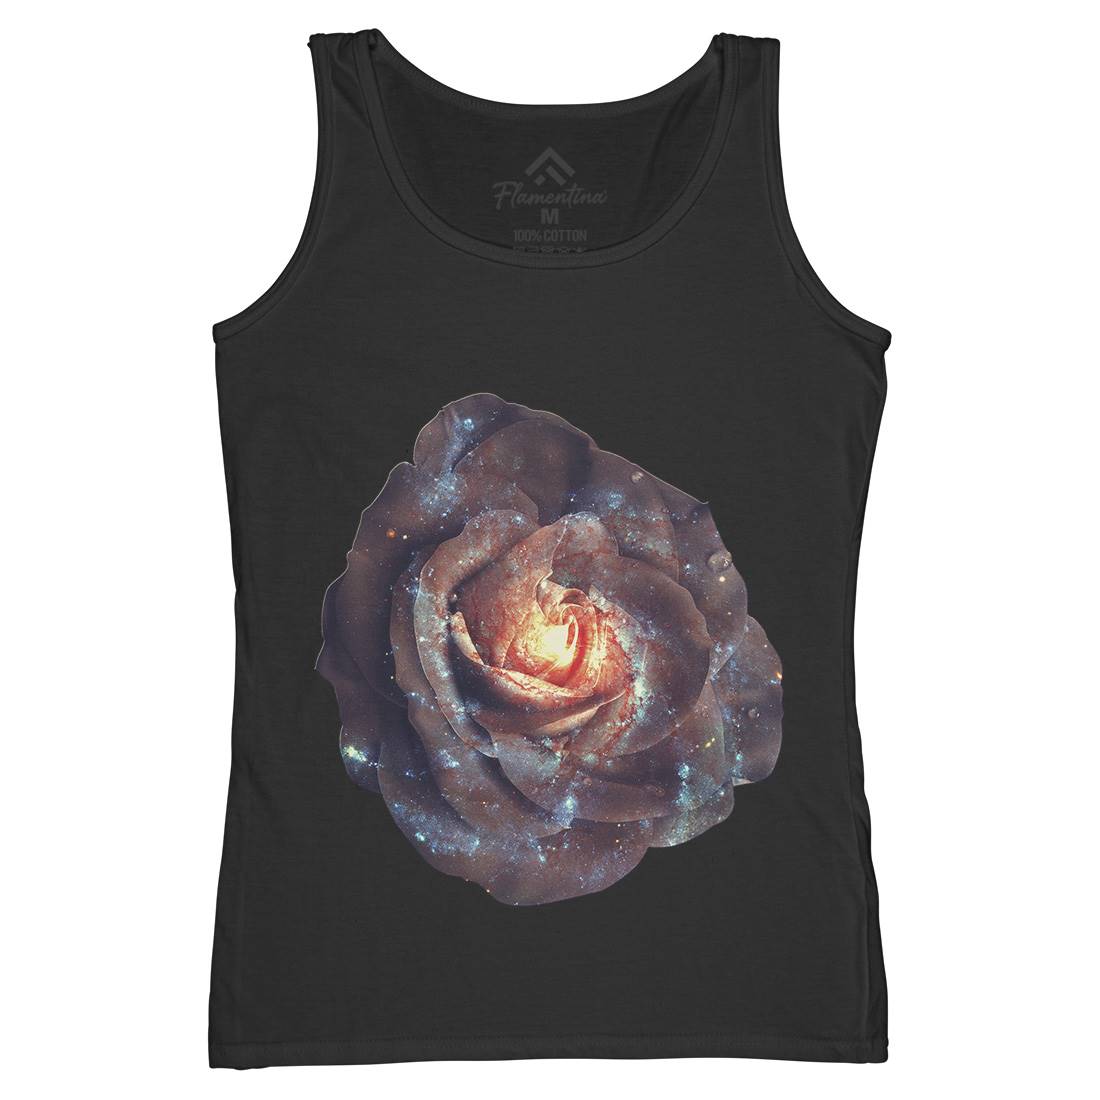 Galactic Rose Womens Organic Tank Top Vest Space A840